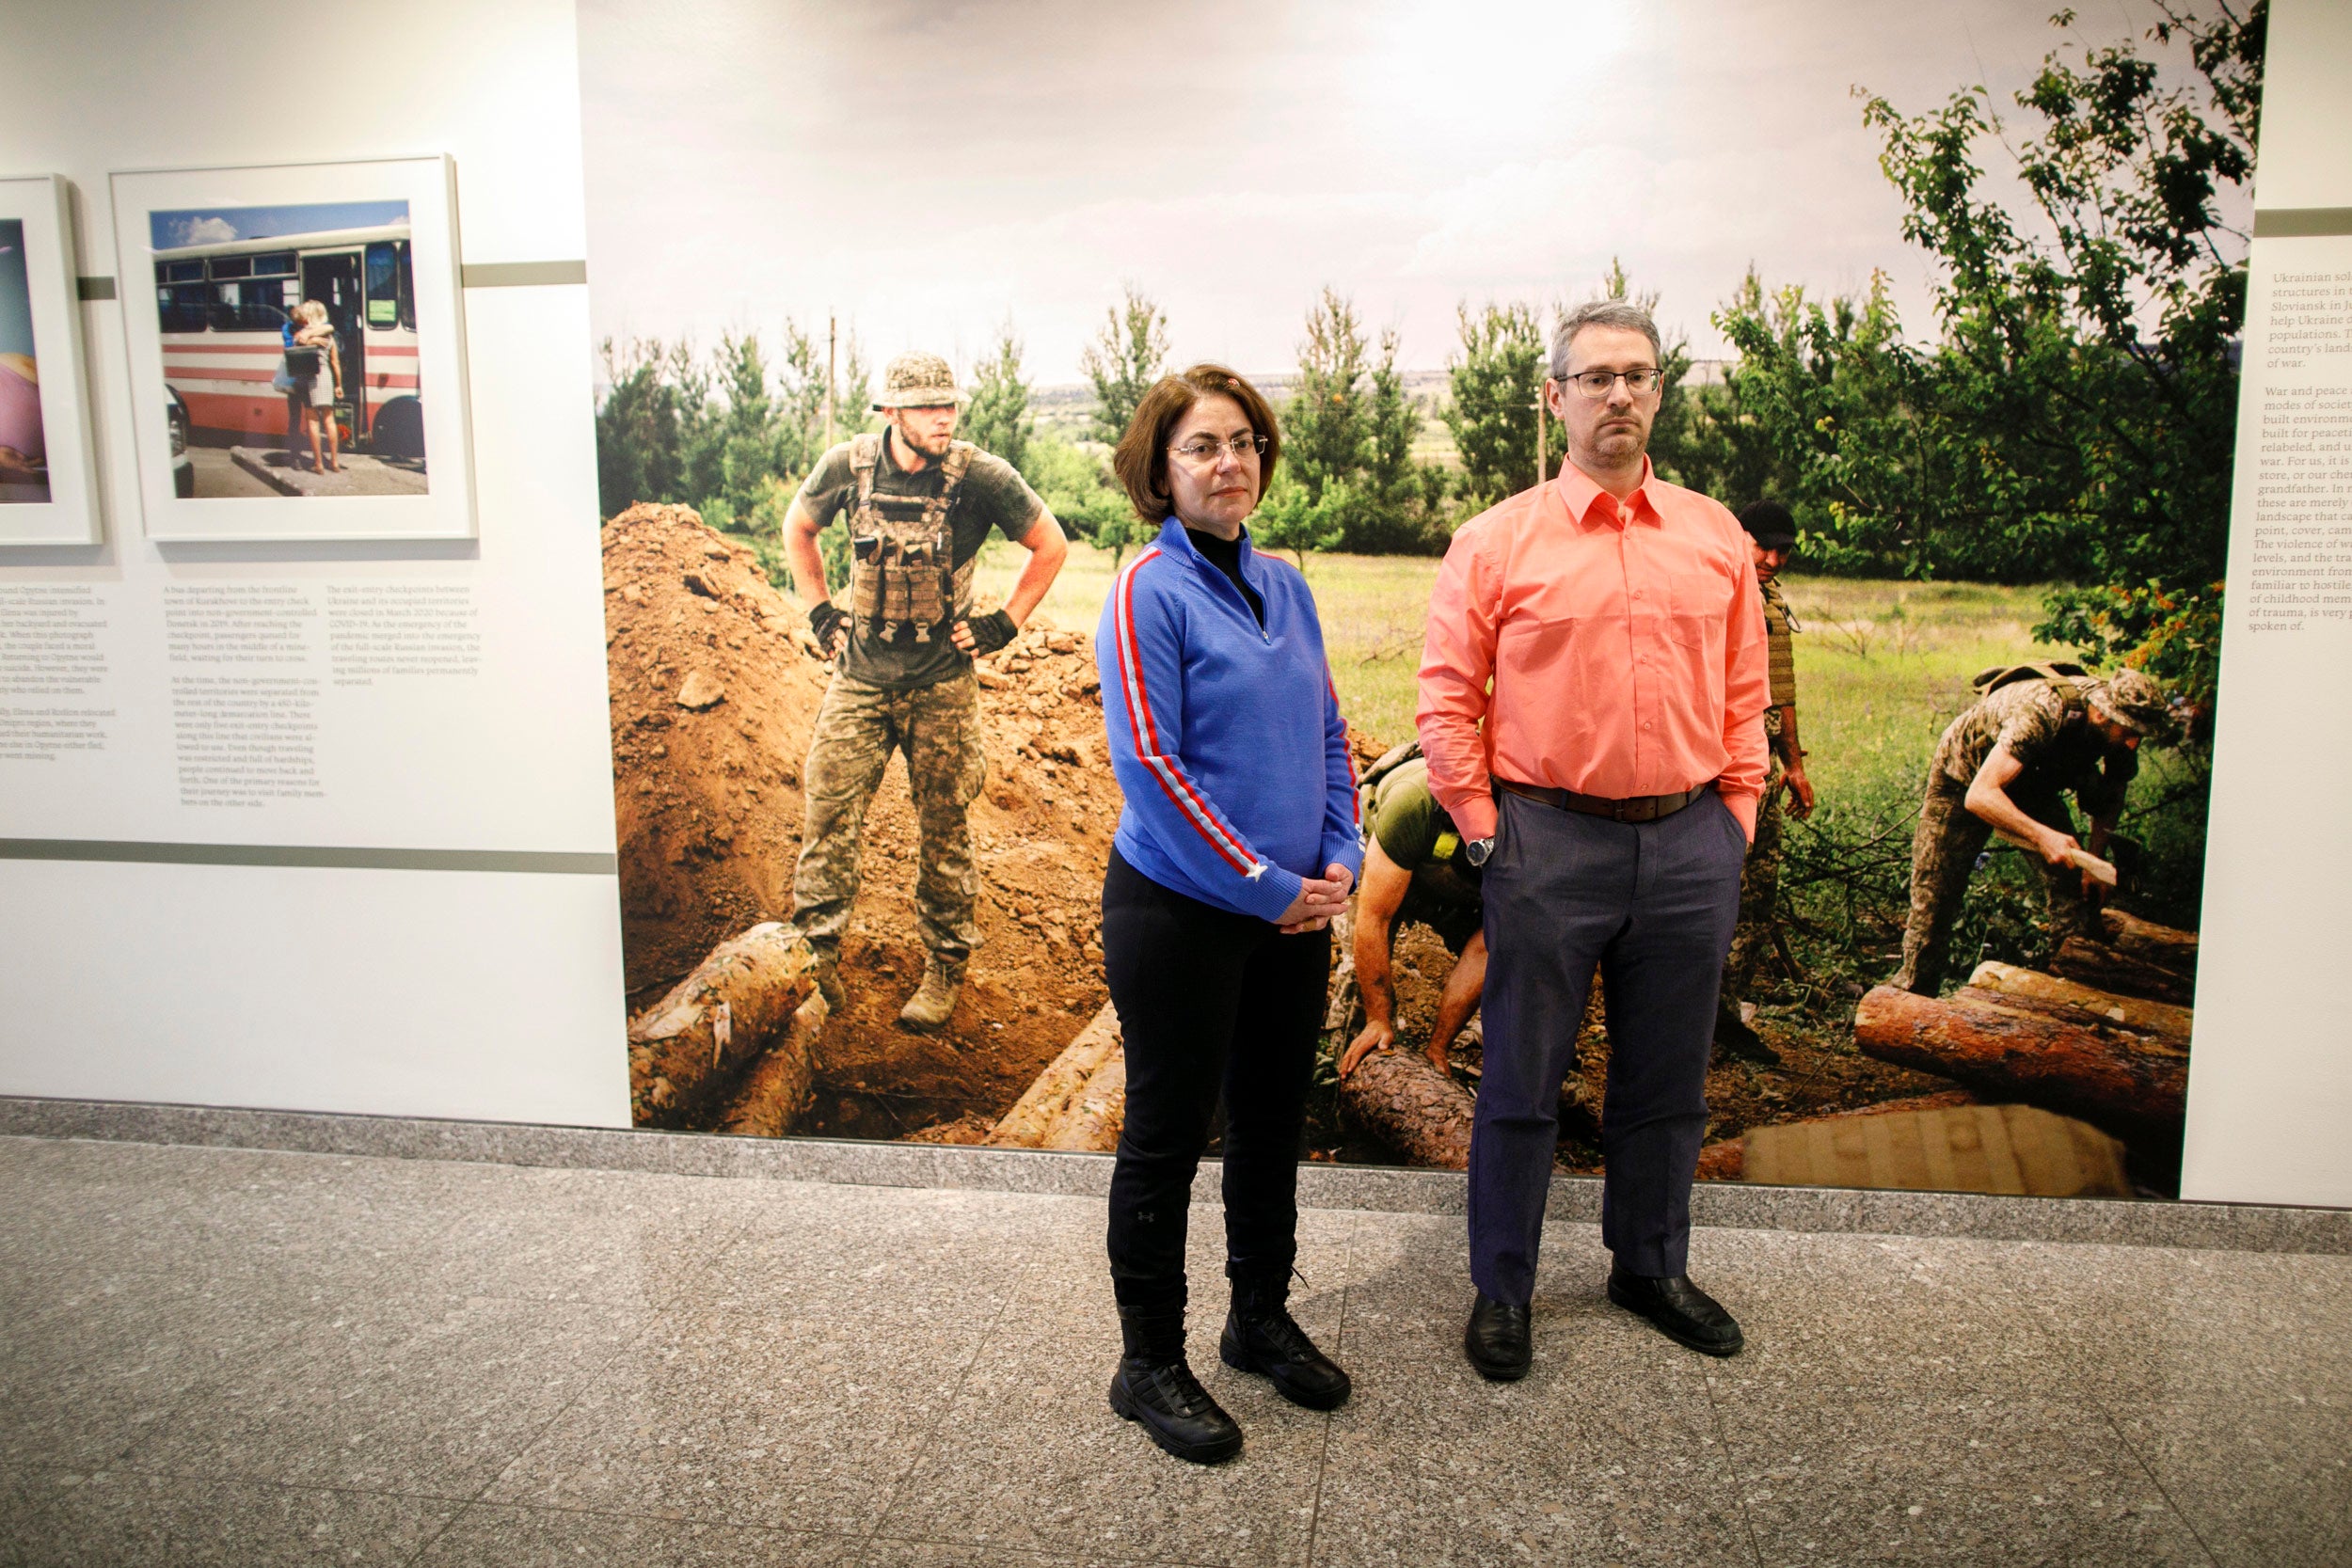 Alexandra Vacroux and Daniel Epsteinstanding in an exhibition called “5K from the Frontline” that features photography by Anastasia Taylor-Lind taken in the region of Donbas of eastern Ukraine.